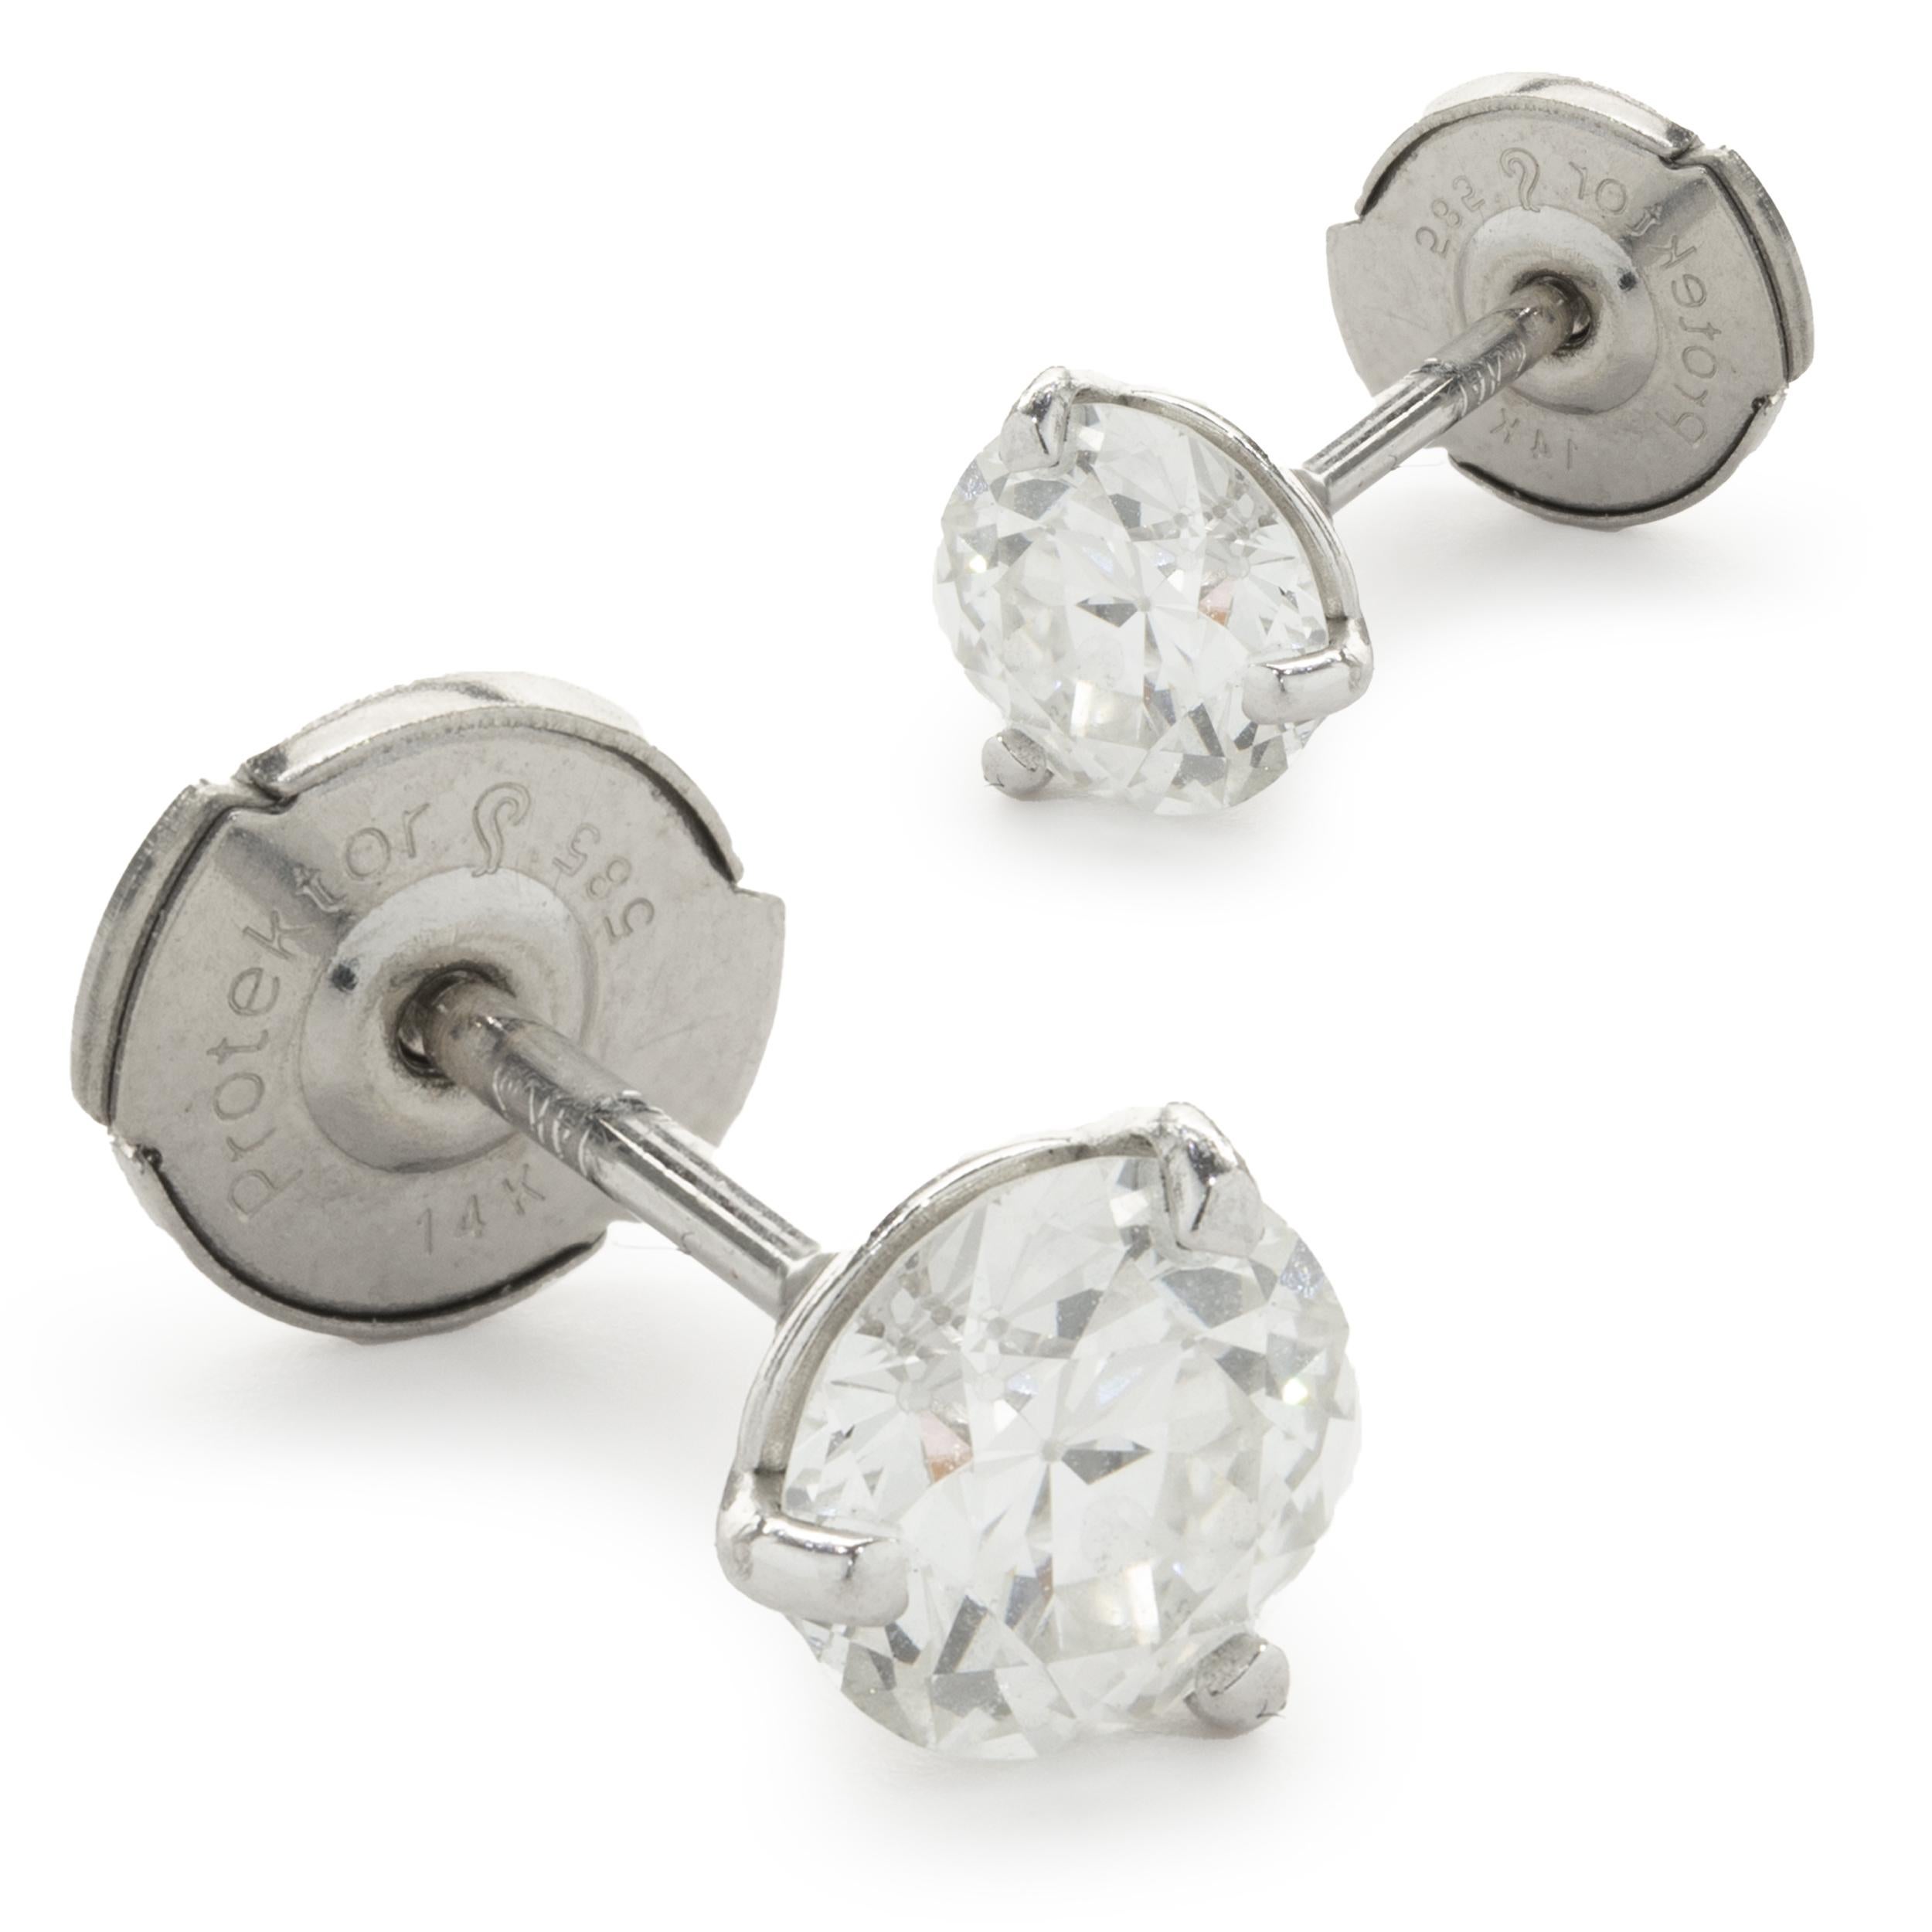 Material: 14k white gold
Diamond: 2 round European cut = 0.90cttw 
Color: I / J
Clarity: I1
Dimensions: earrings measure approximately 5.98mm in diameter
Fastenings: post with la pousette backs
Weight: 1.08 grams
